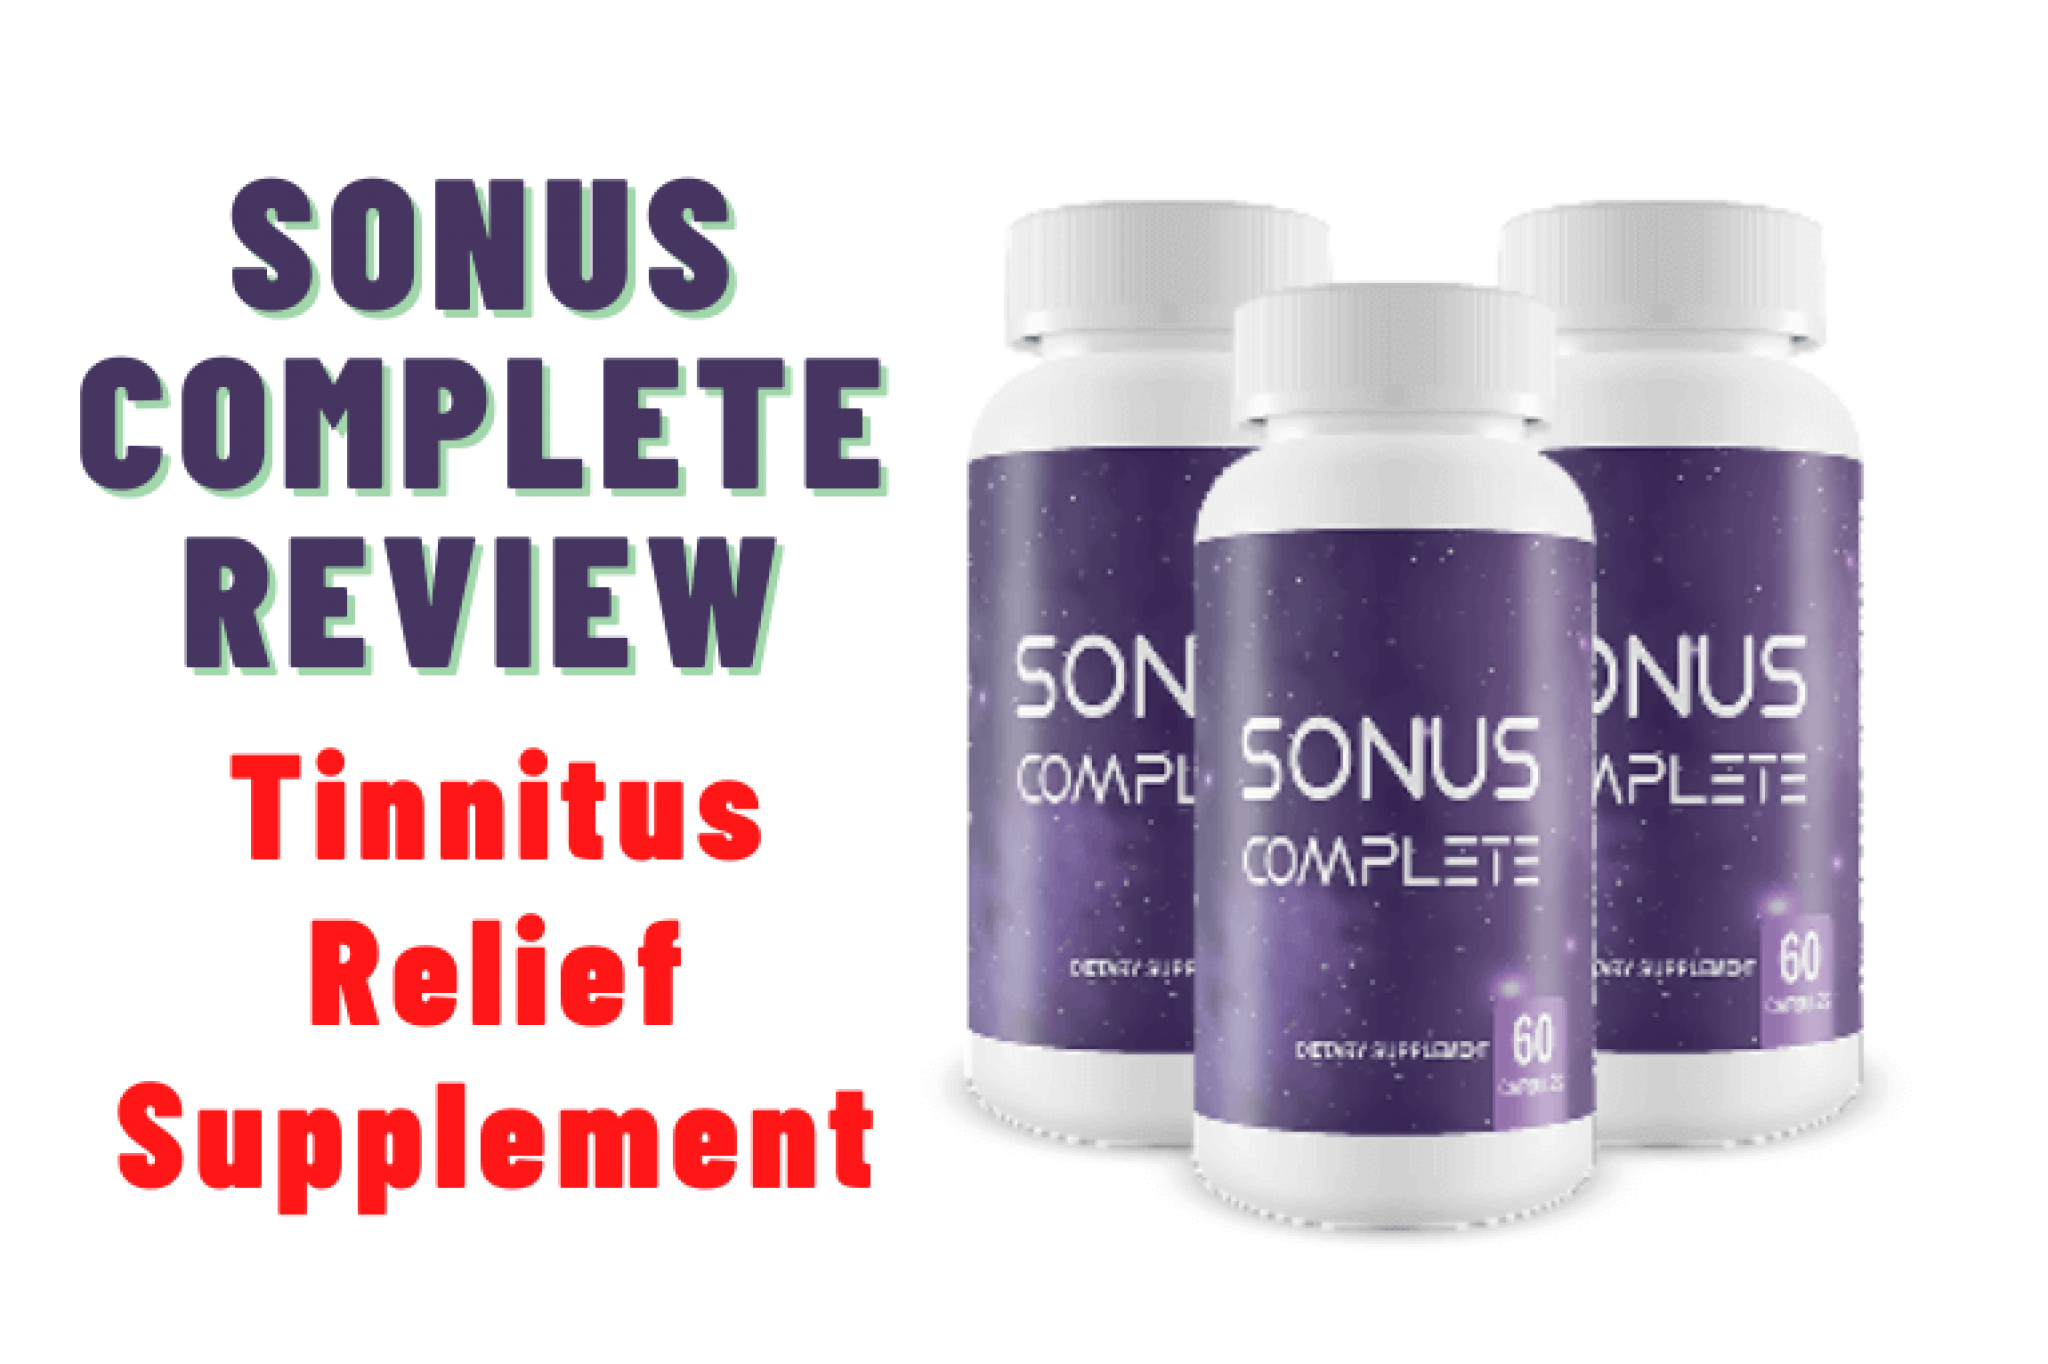 Sonus Complete Reviews: Tinnitus Relief Supplement Does It Really Work?